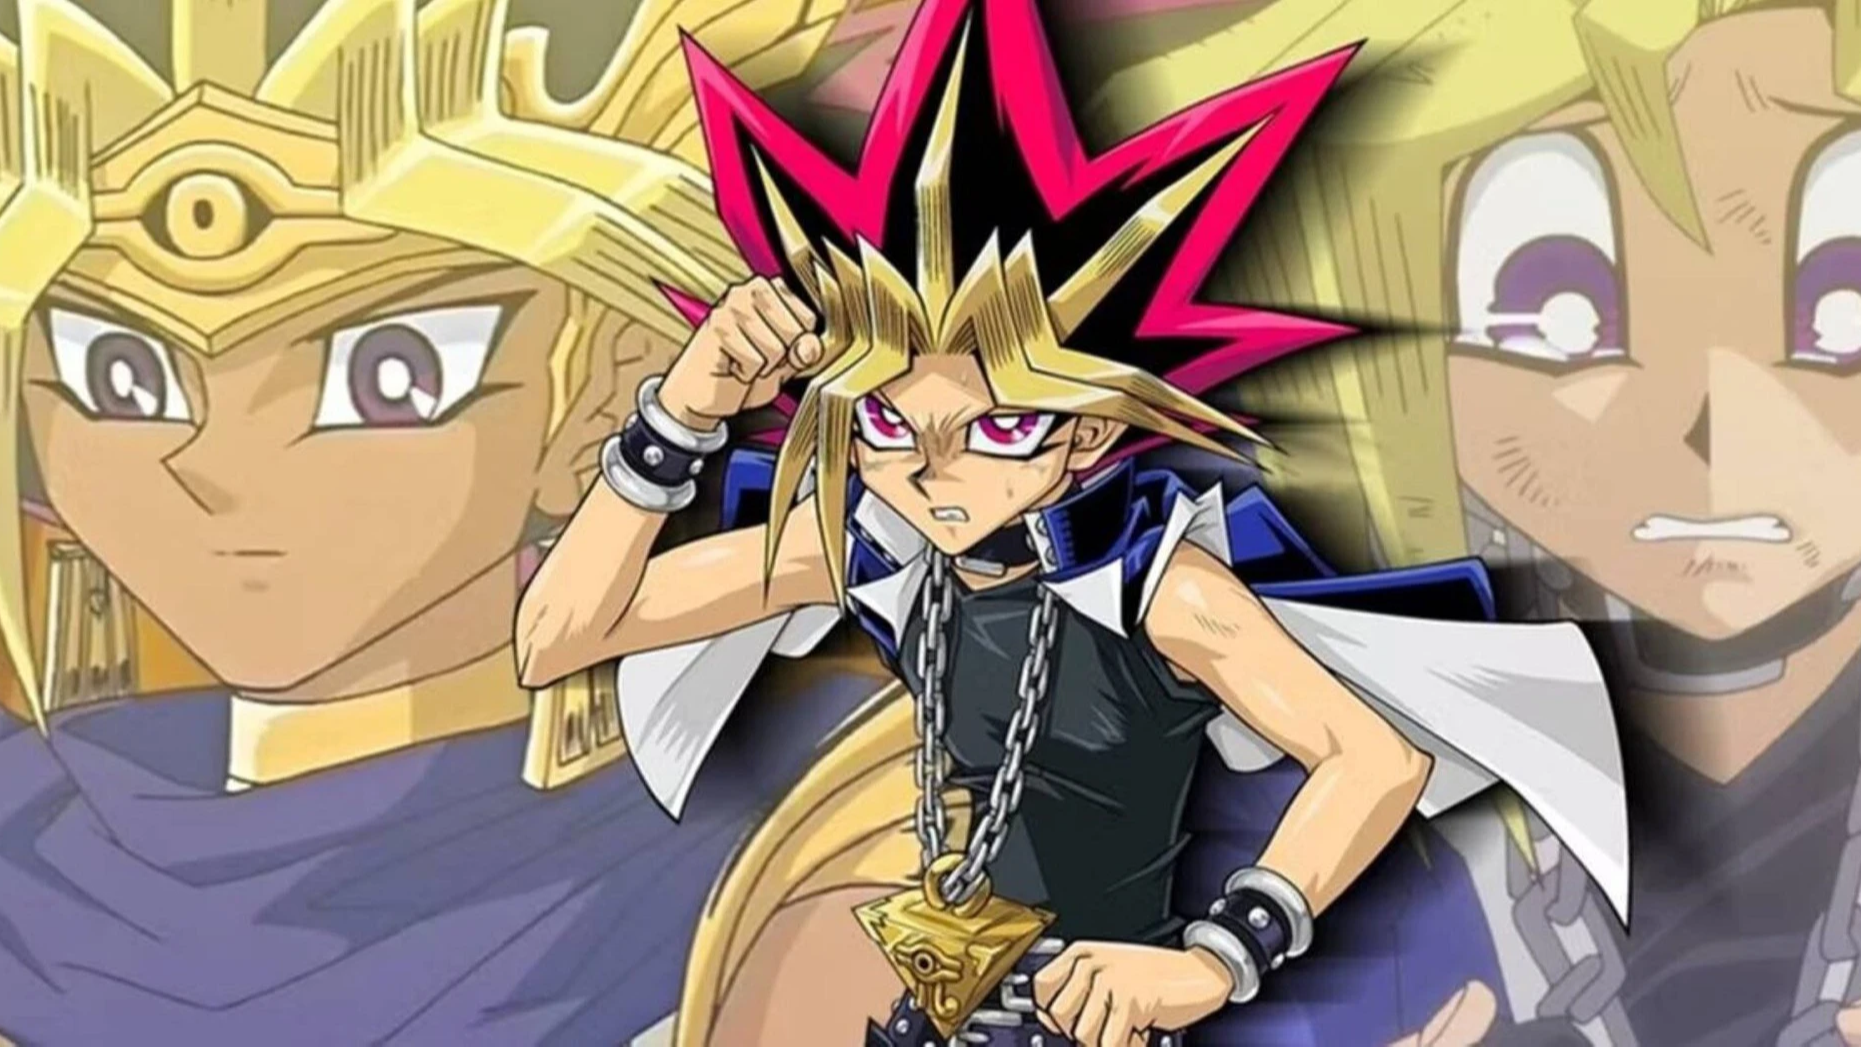 Yu-Gi-Oh!: There is an extremely effective card battle strategy that makes Yugi almost impossible to beat - Photo 2.